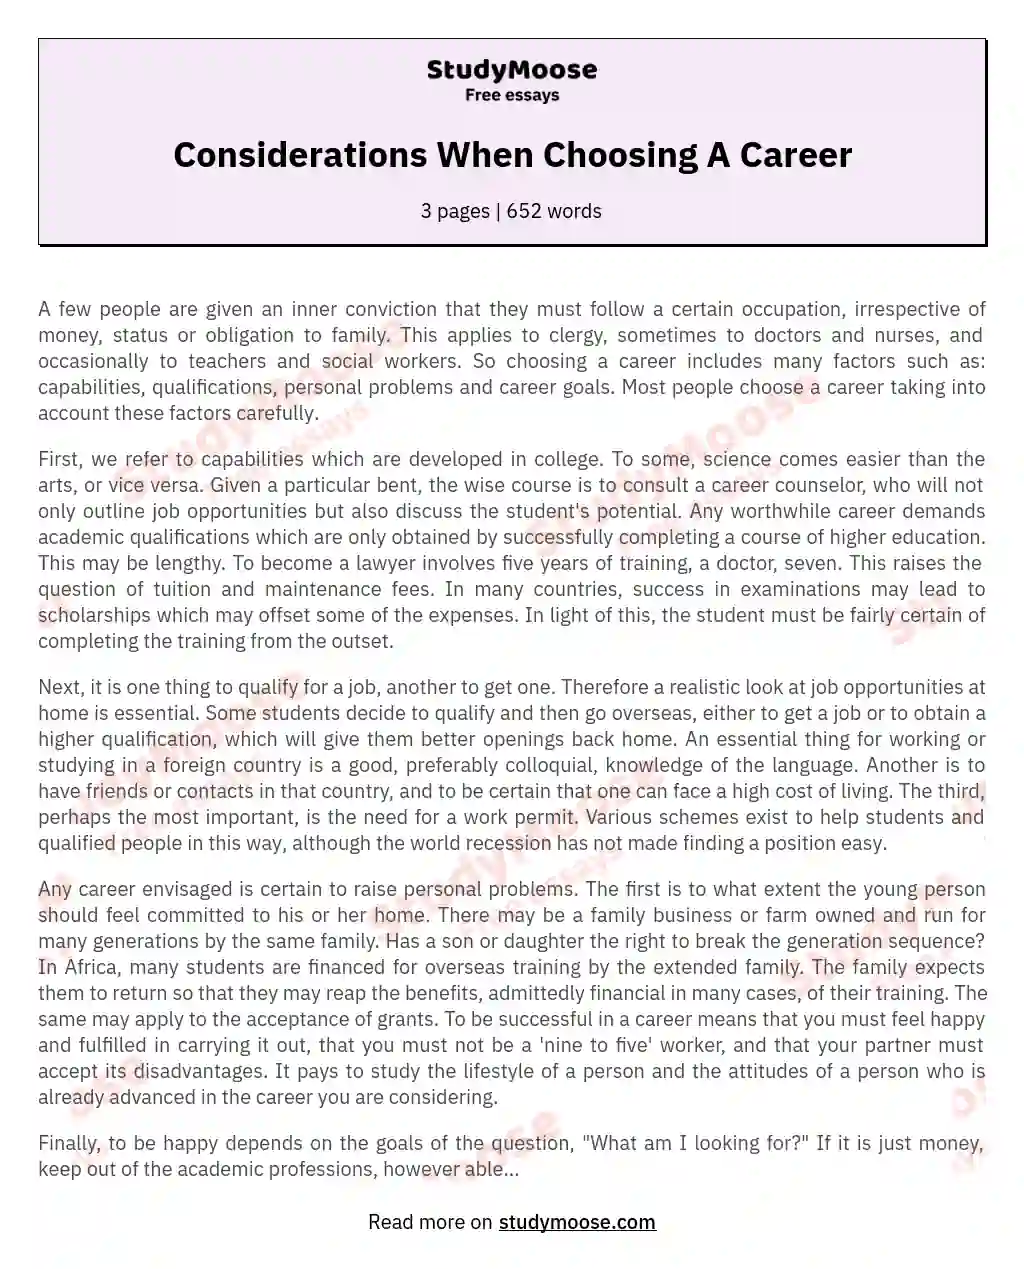 Considerations When Choosing A Career